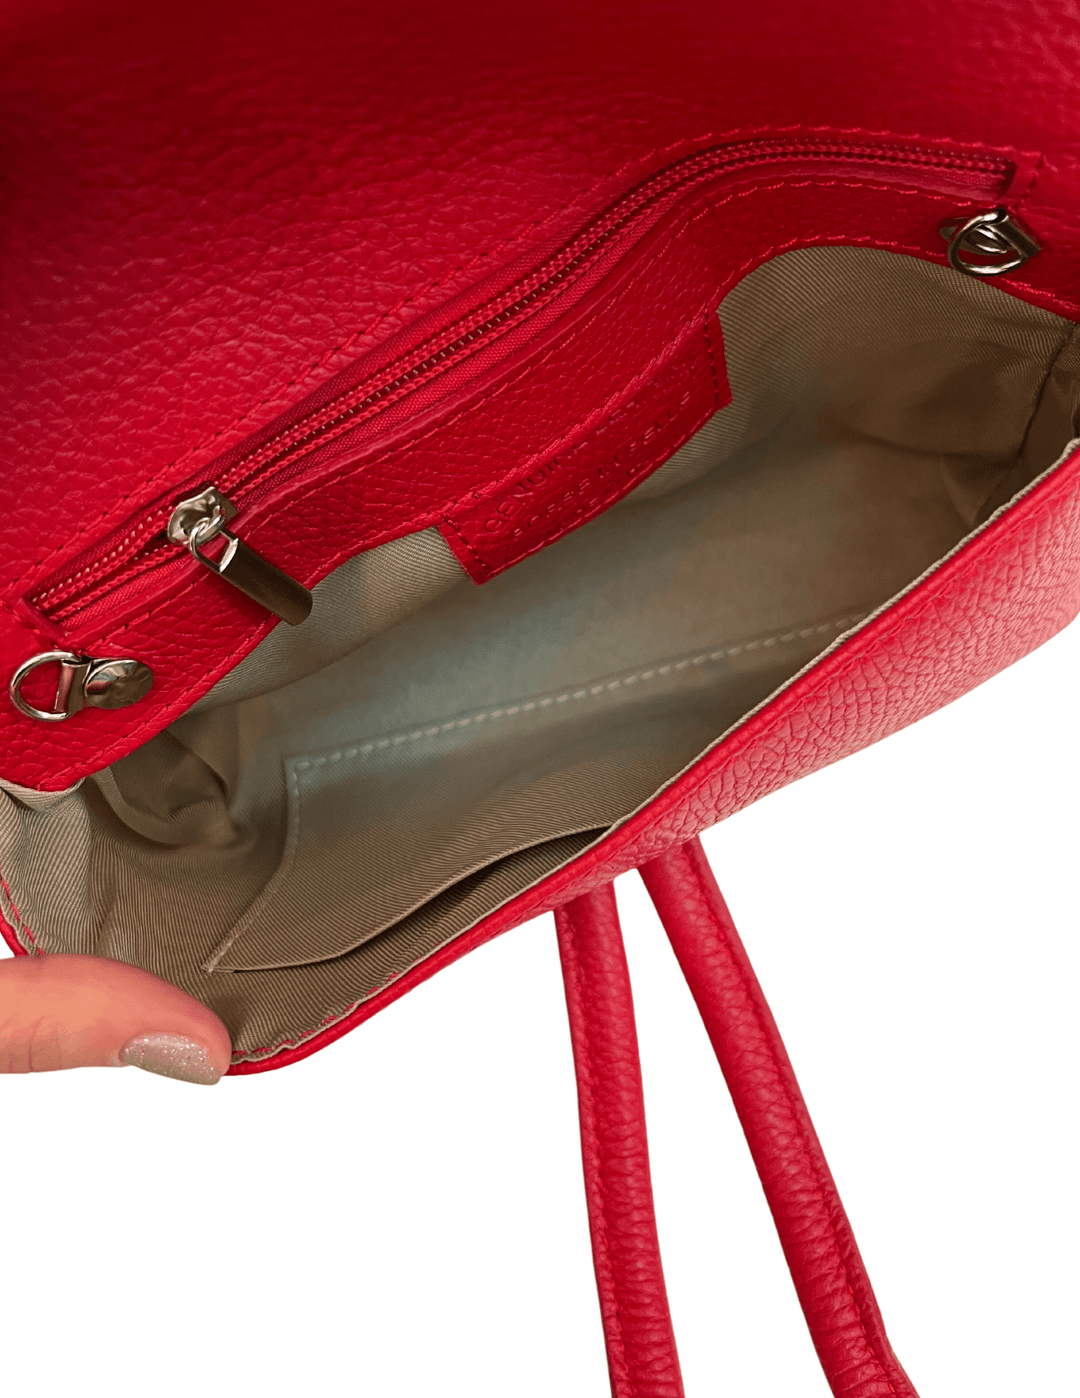 German Fuentes/NF Fashion Group leather coloful clutch tres chic womens gift boutique red inside pocket